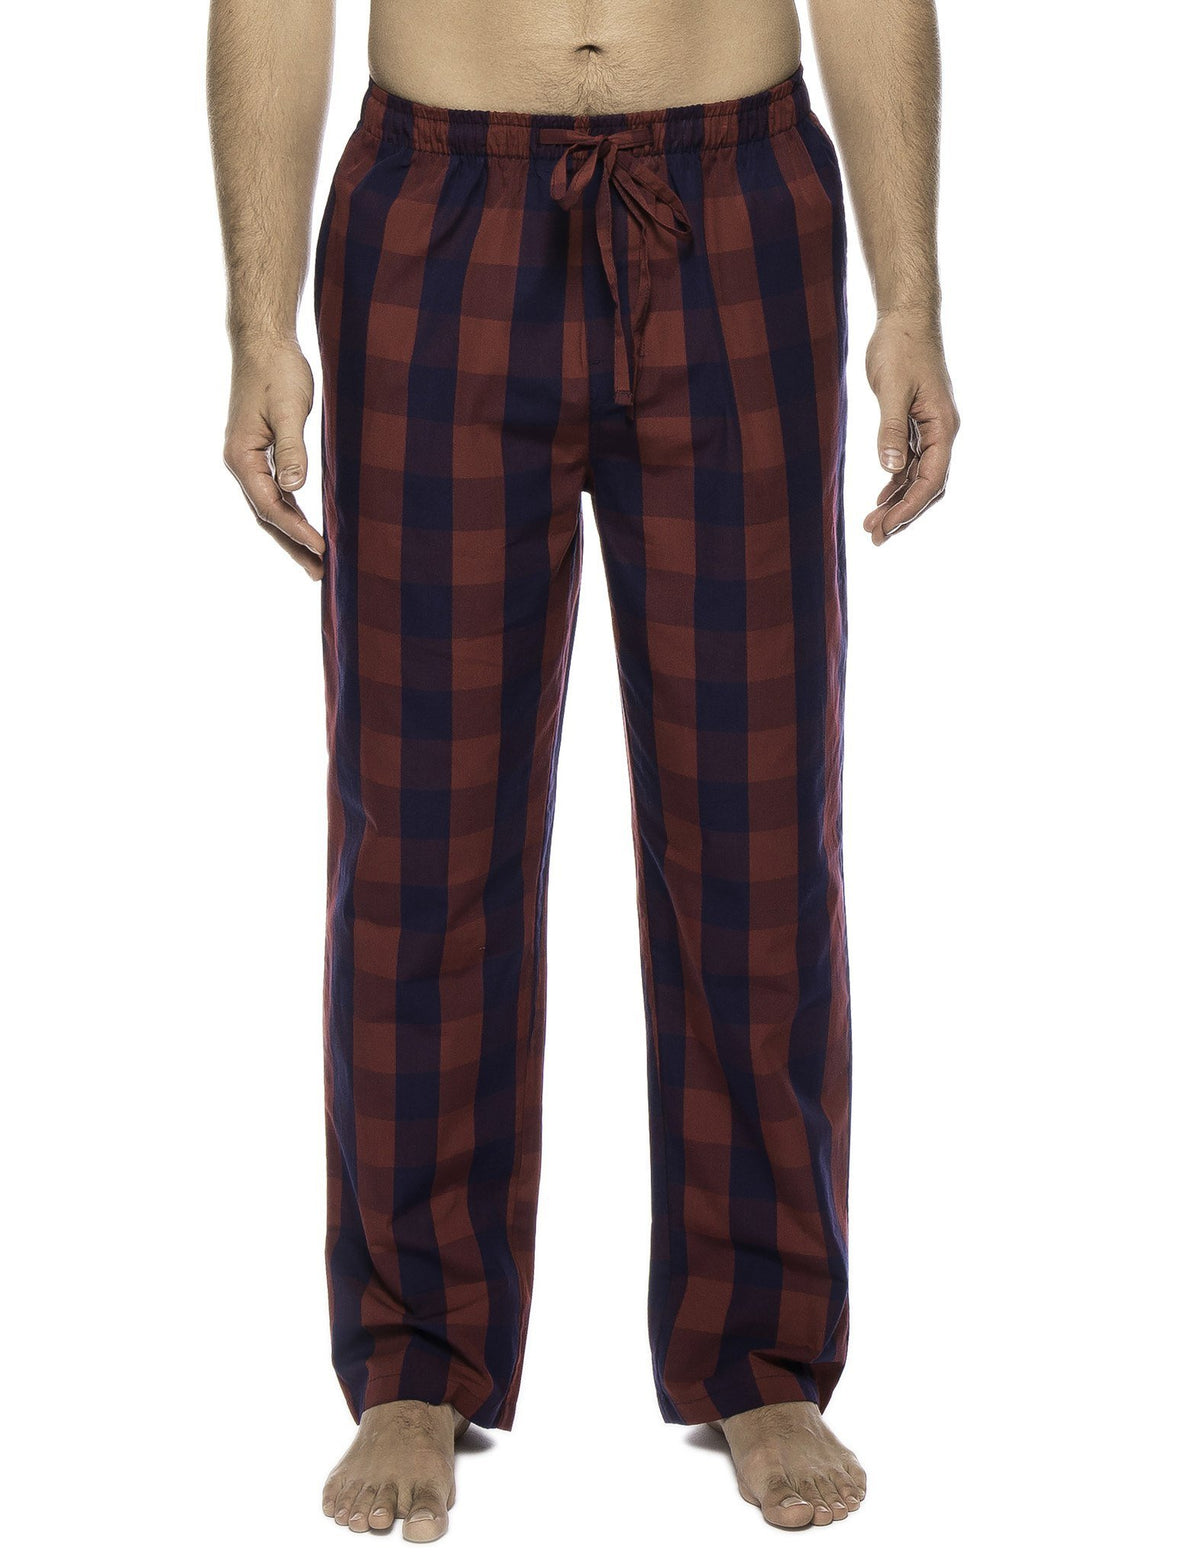 Men's 100% Woven Cotton Lounge Pants - Gingham Red/Navy